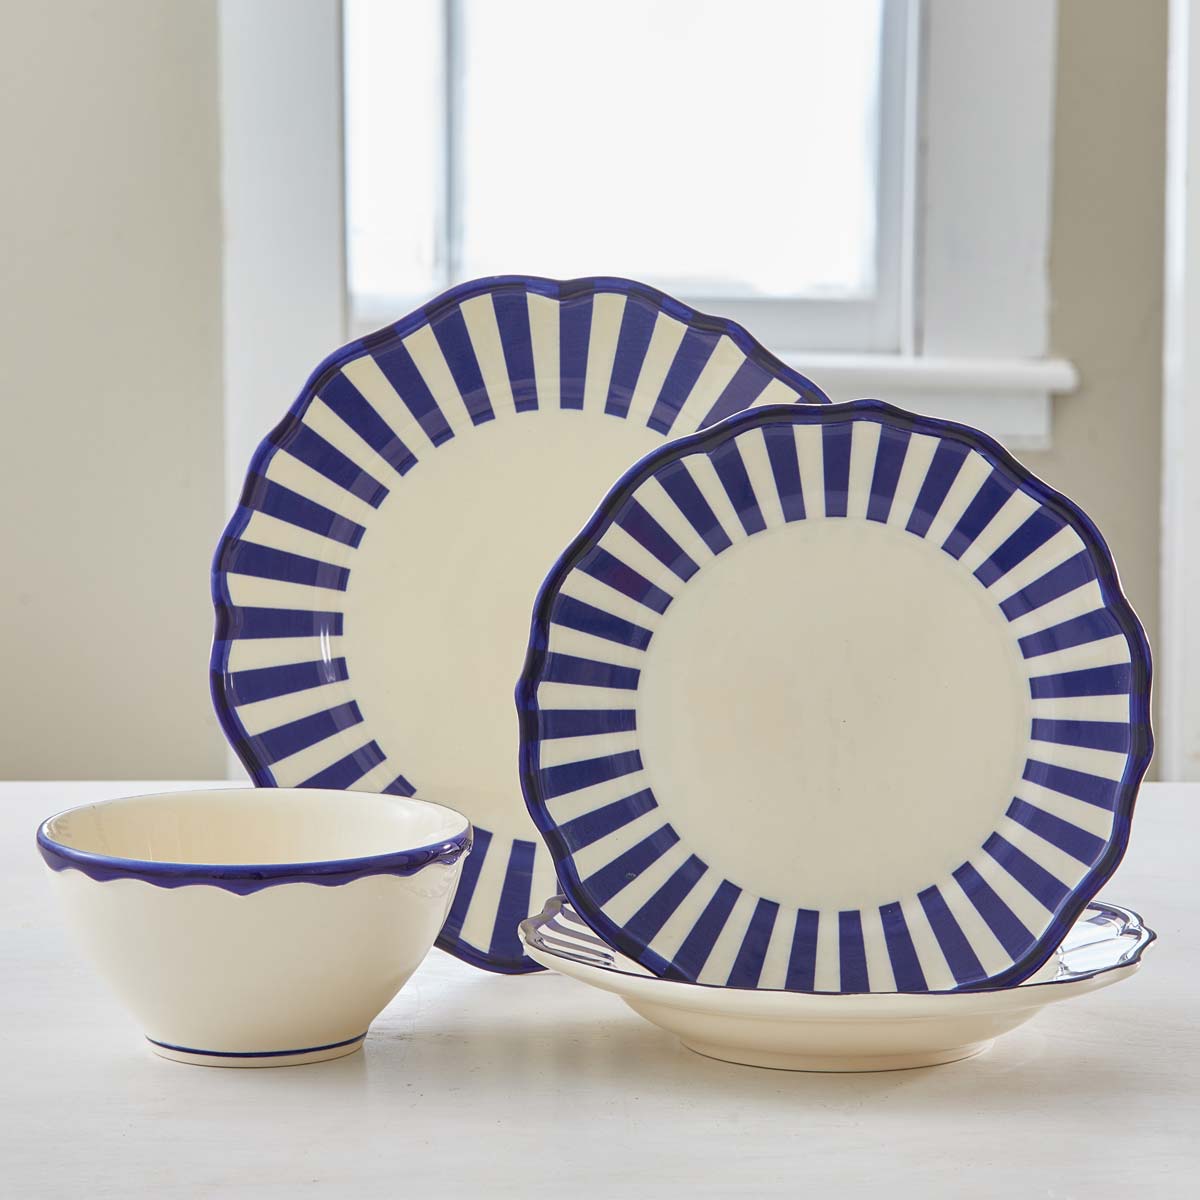 HAND-PAINTED DINNERWARE - AWNING STRIPES